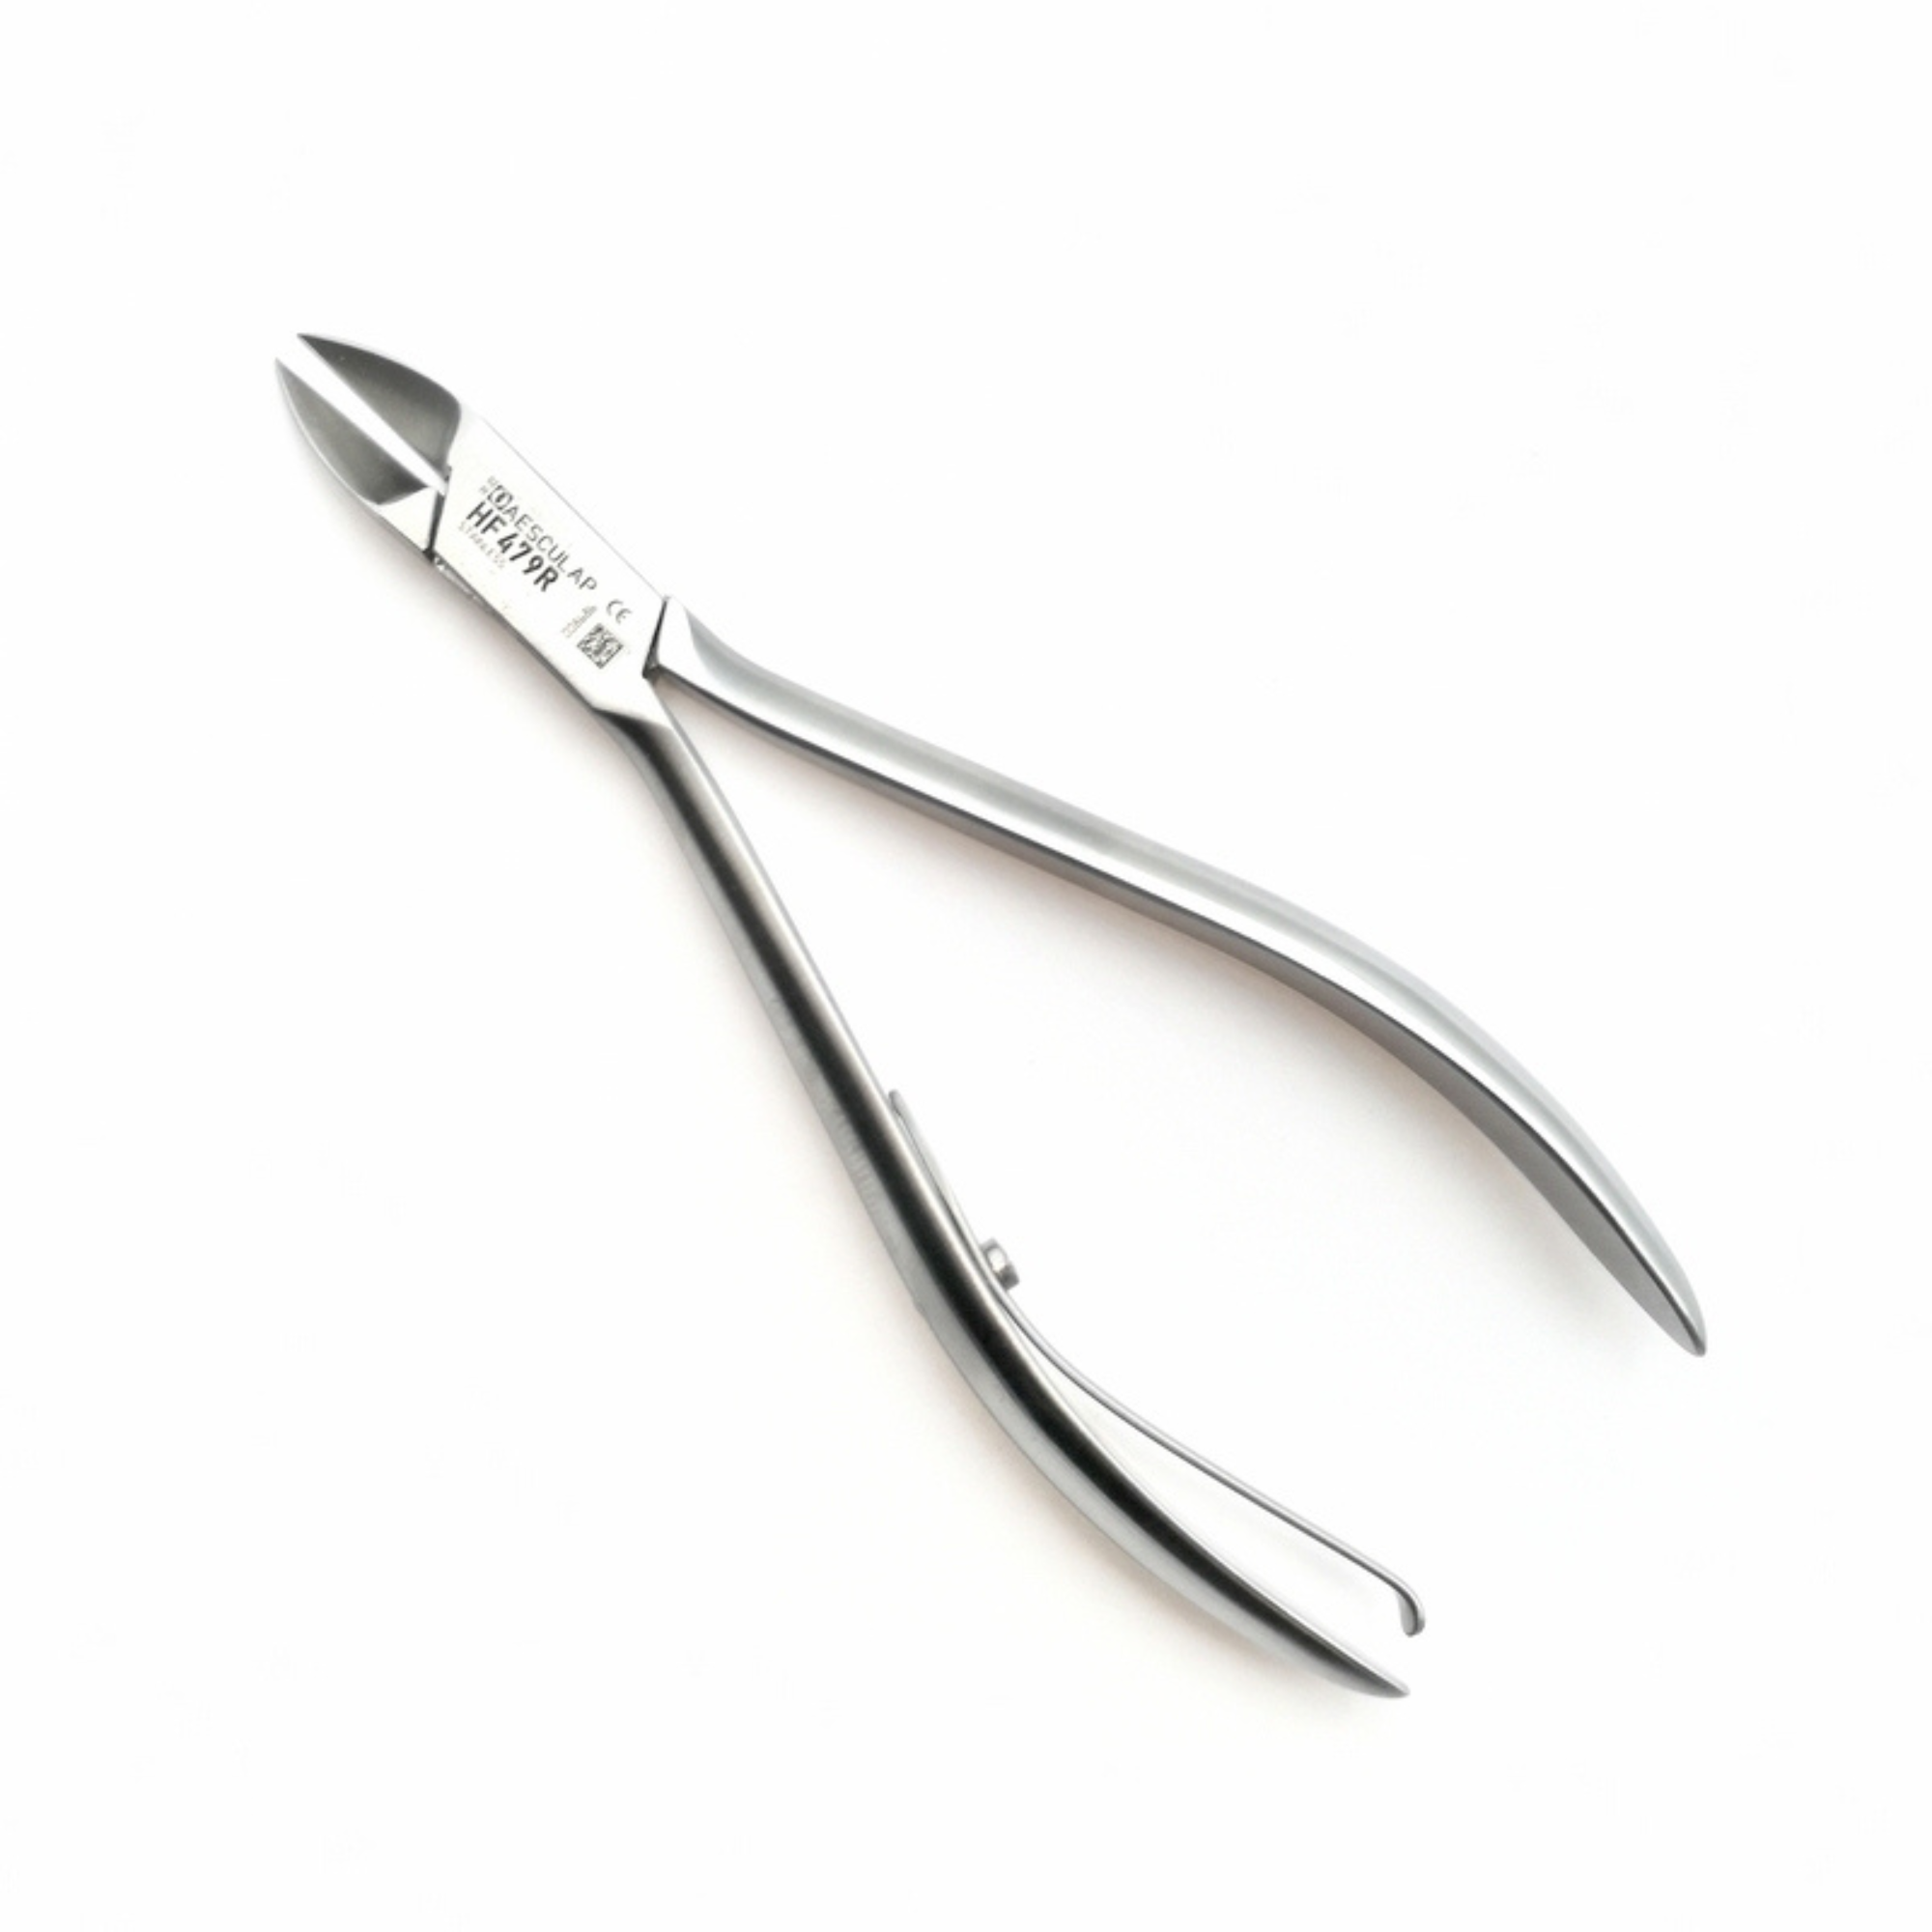 Pince à ongles - Coupe droite - Mors fins - 13 cm - Aesculap - HF479R